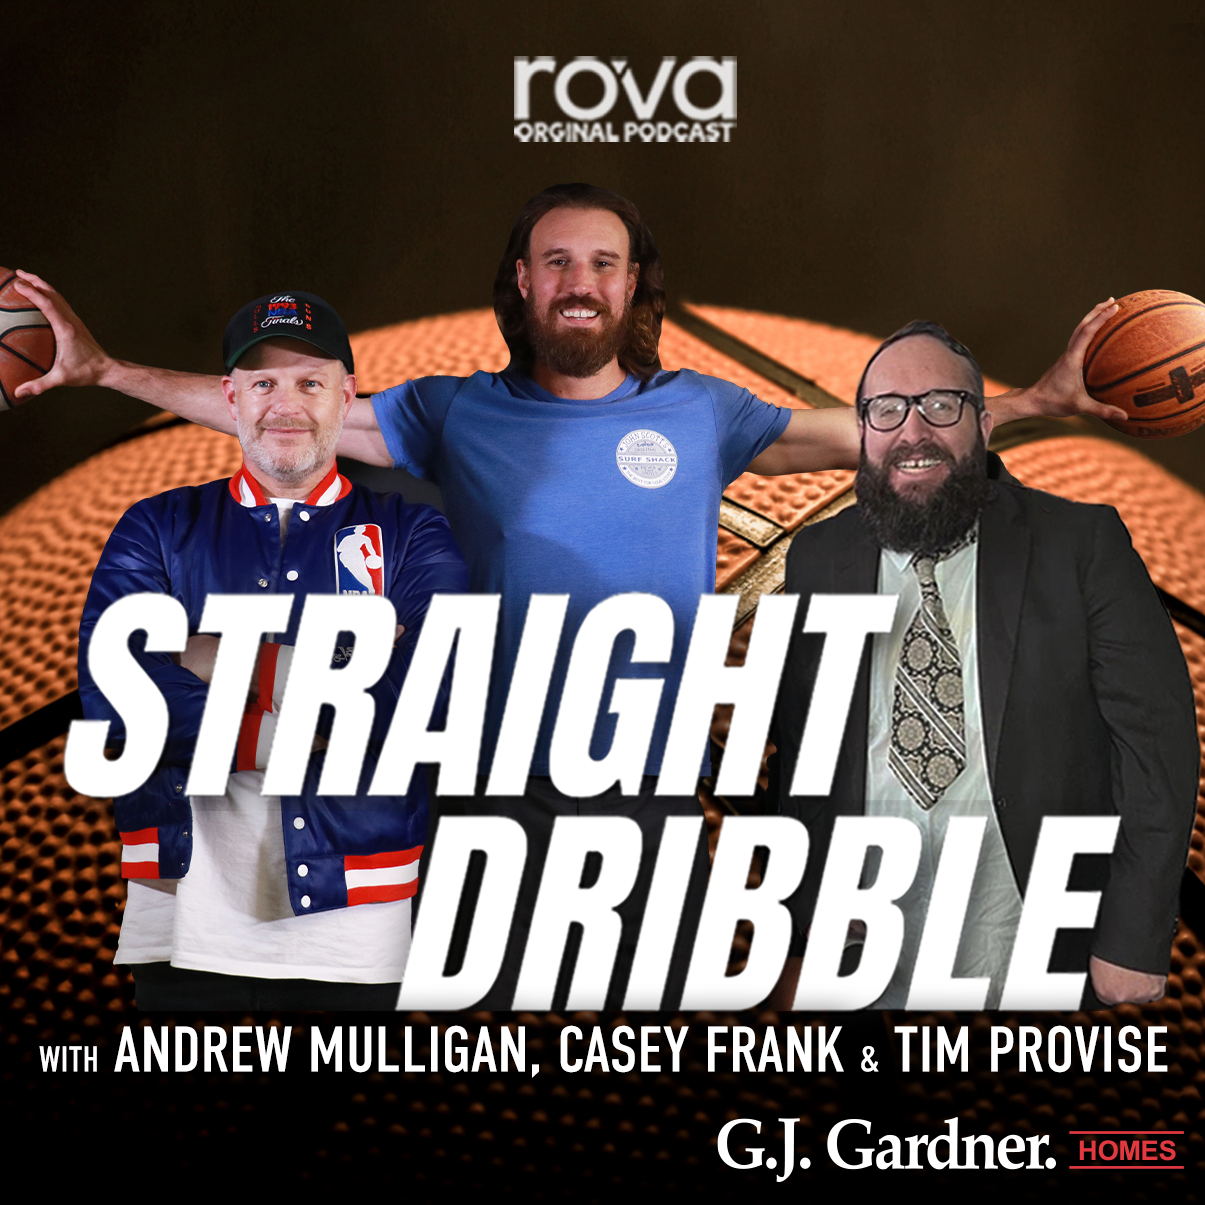 Straight Dribble - Can the Denver Nuggets bring it back? with Kane Pitman